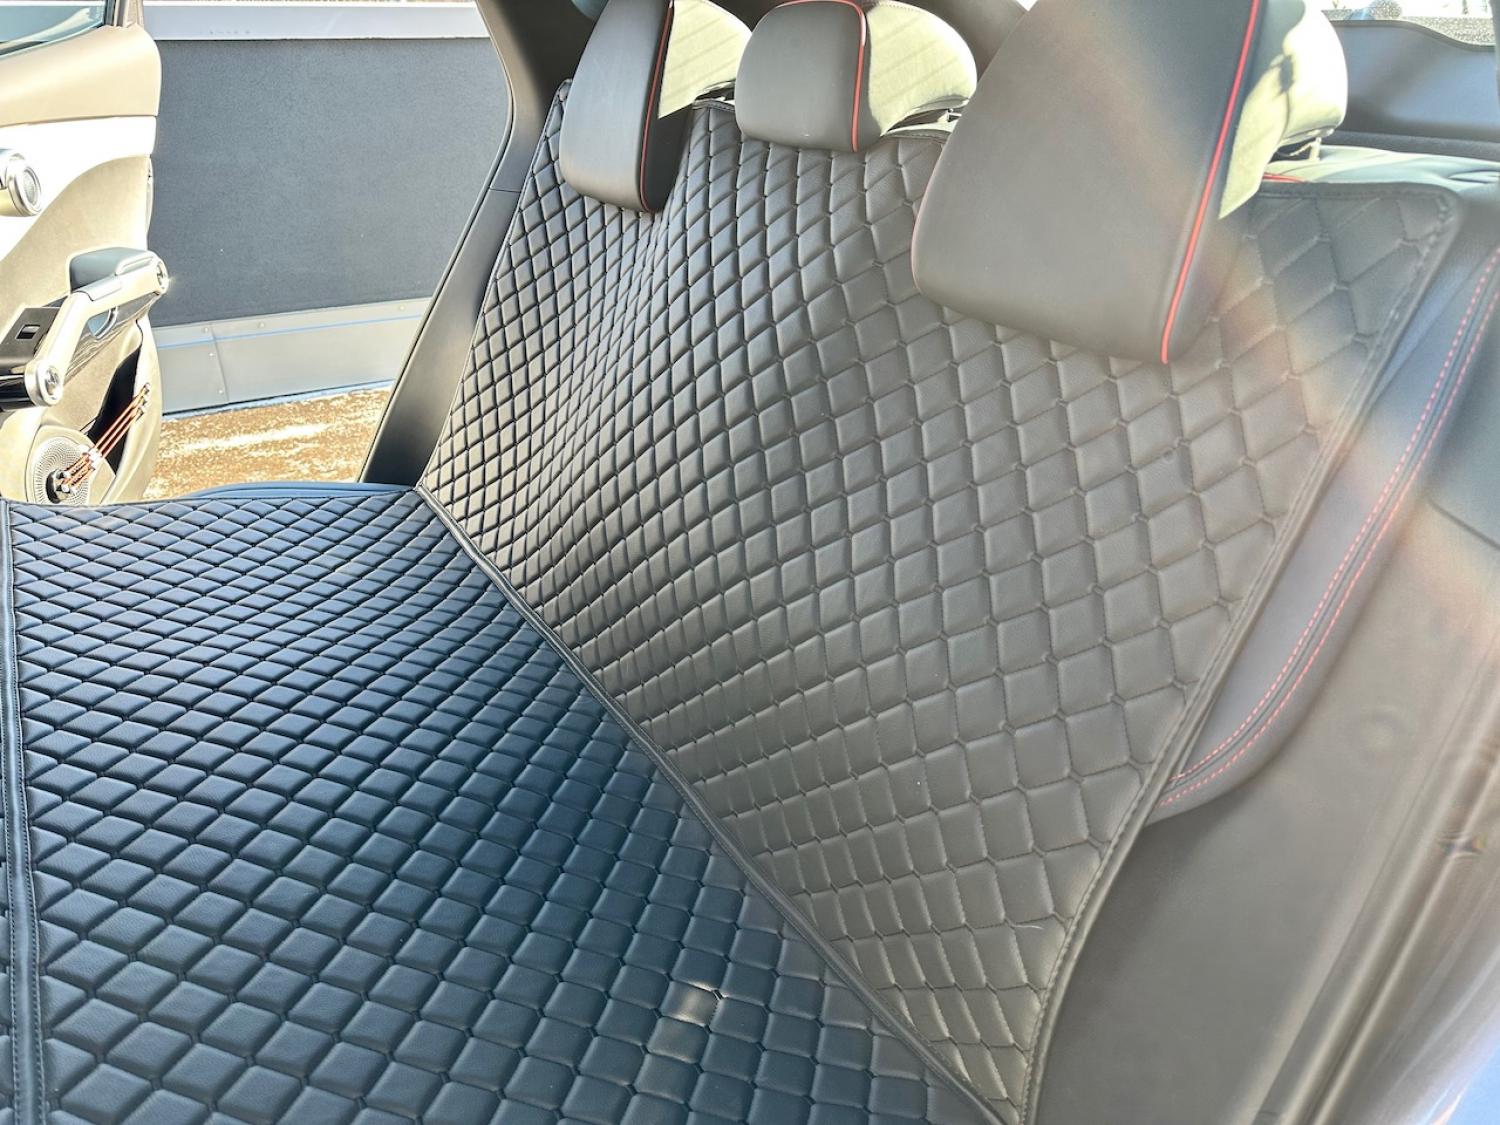 CARSTYLER® Back Seat Cover Geeignet Für Audi A5 8T Coupe 2007-2016